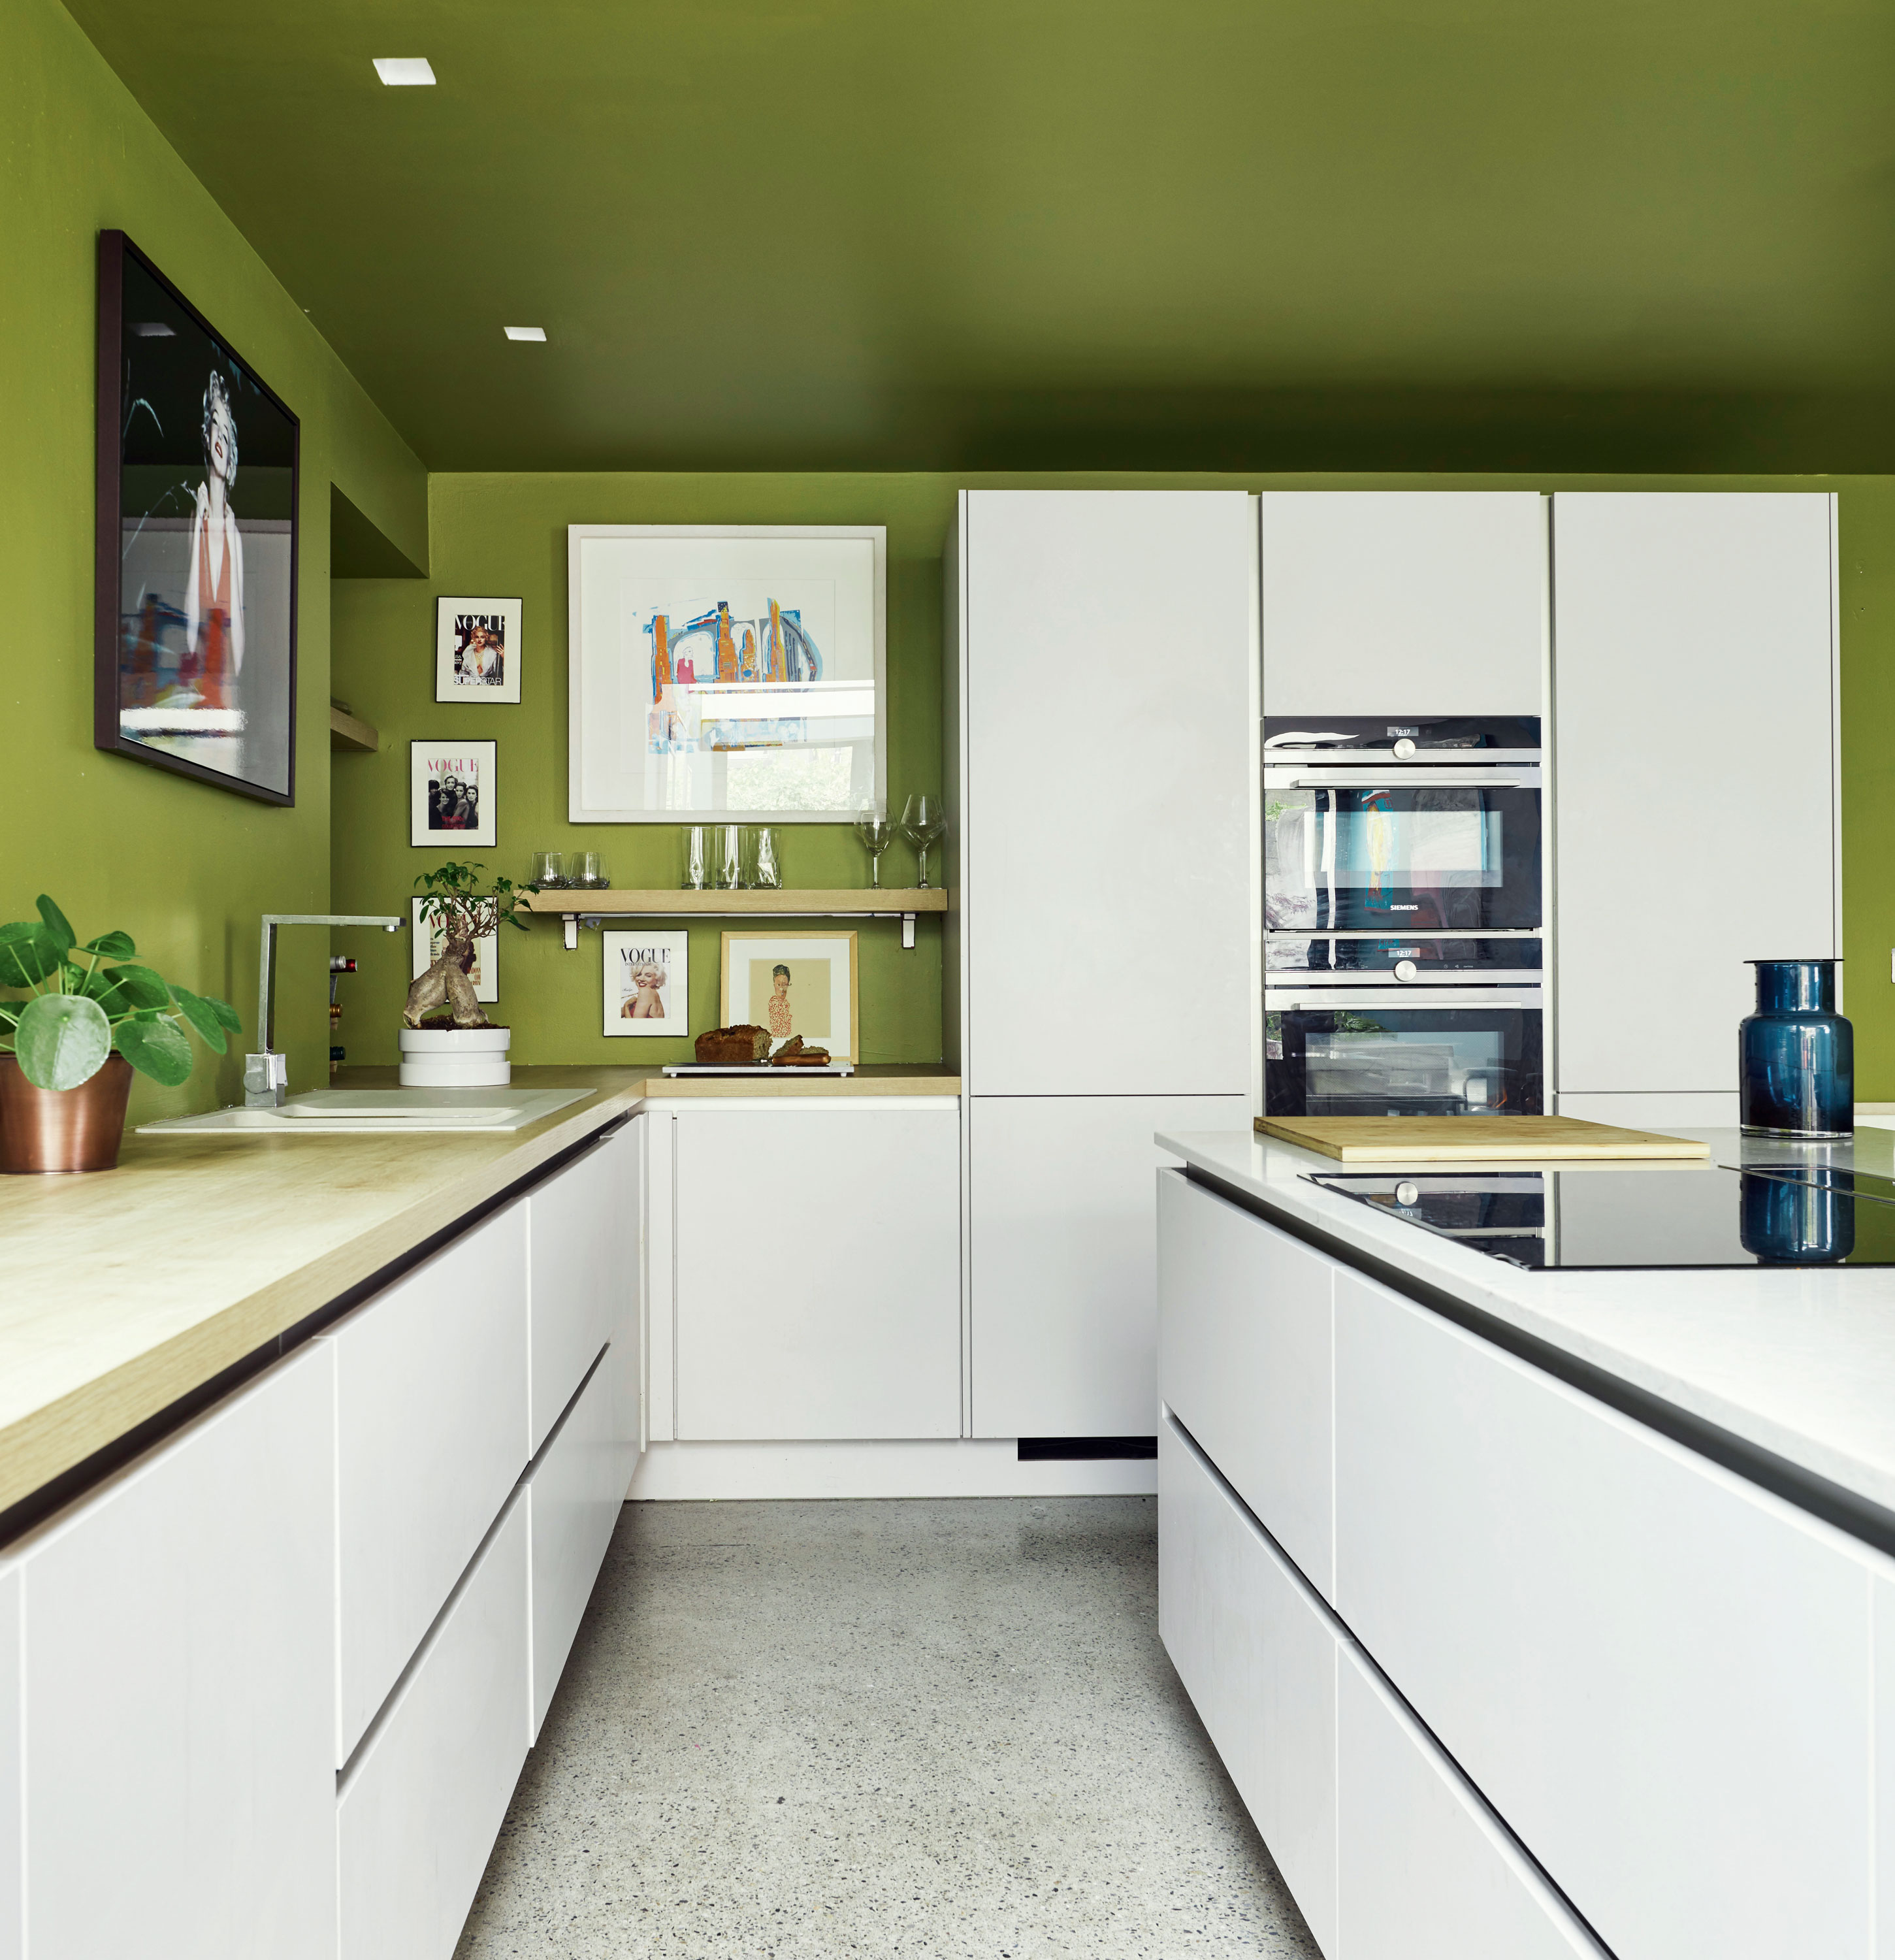 5 ways to cover kitchen countertops replacing them) | Real Homes